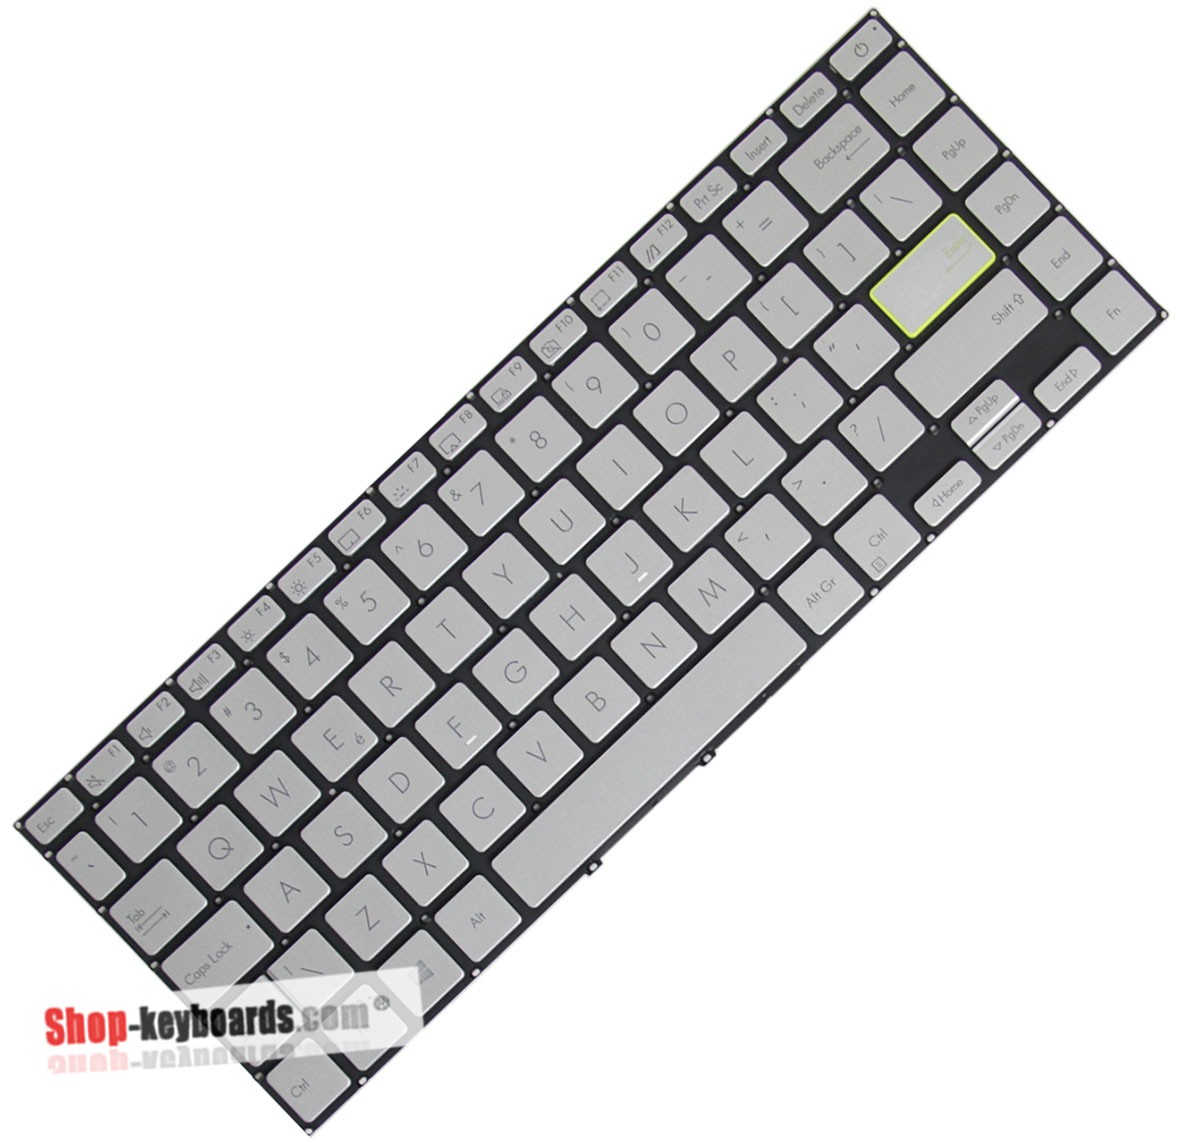 Asus S413UA Keyboard replacement